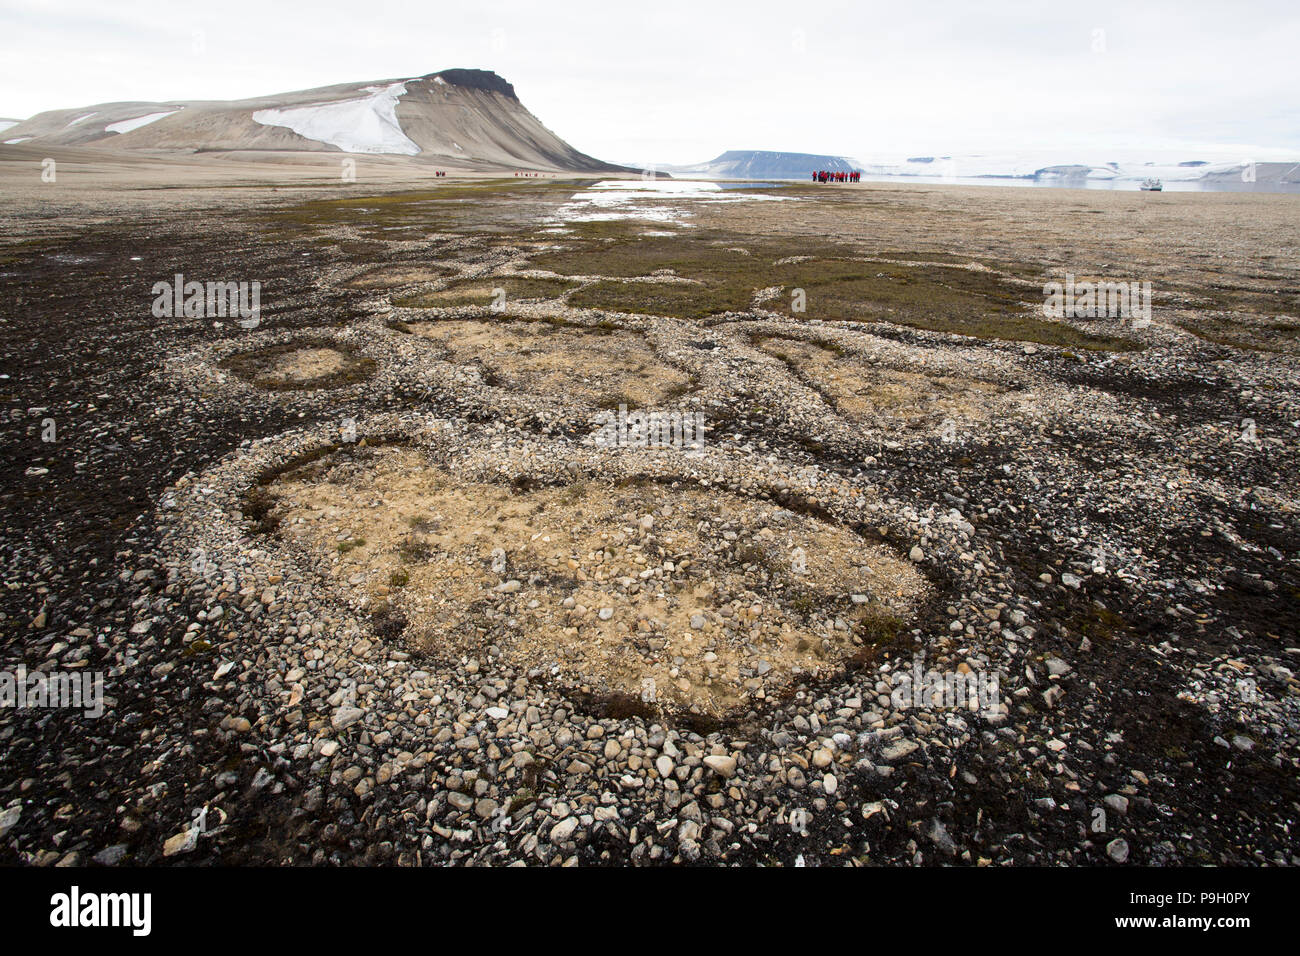 Natural Stone Circles Caused By Cryoturbation in a Polar Desert. Zeipelodden, Svalbard Stock Photo